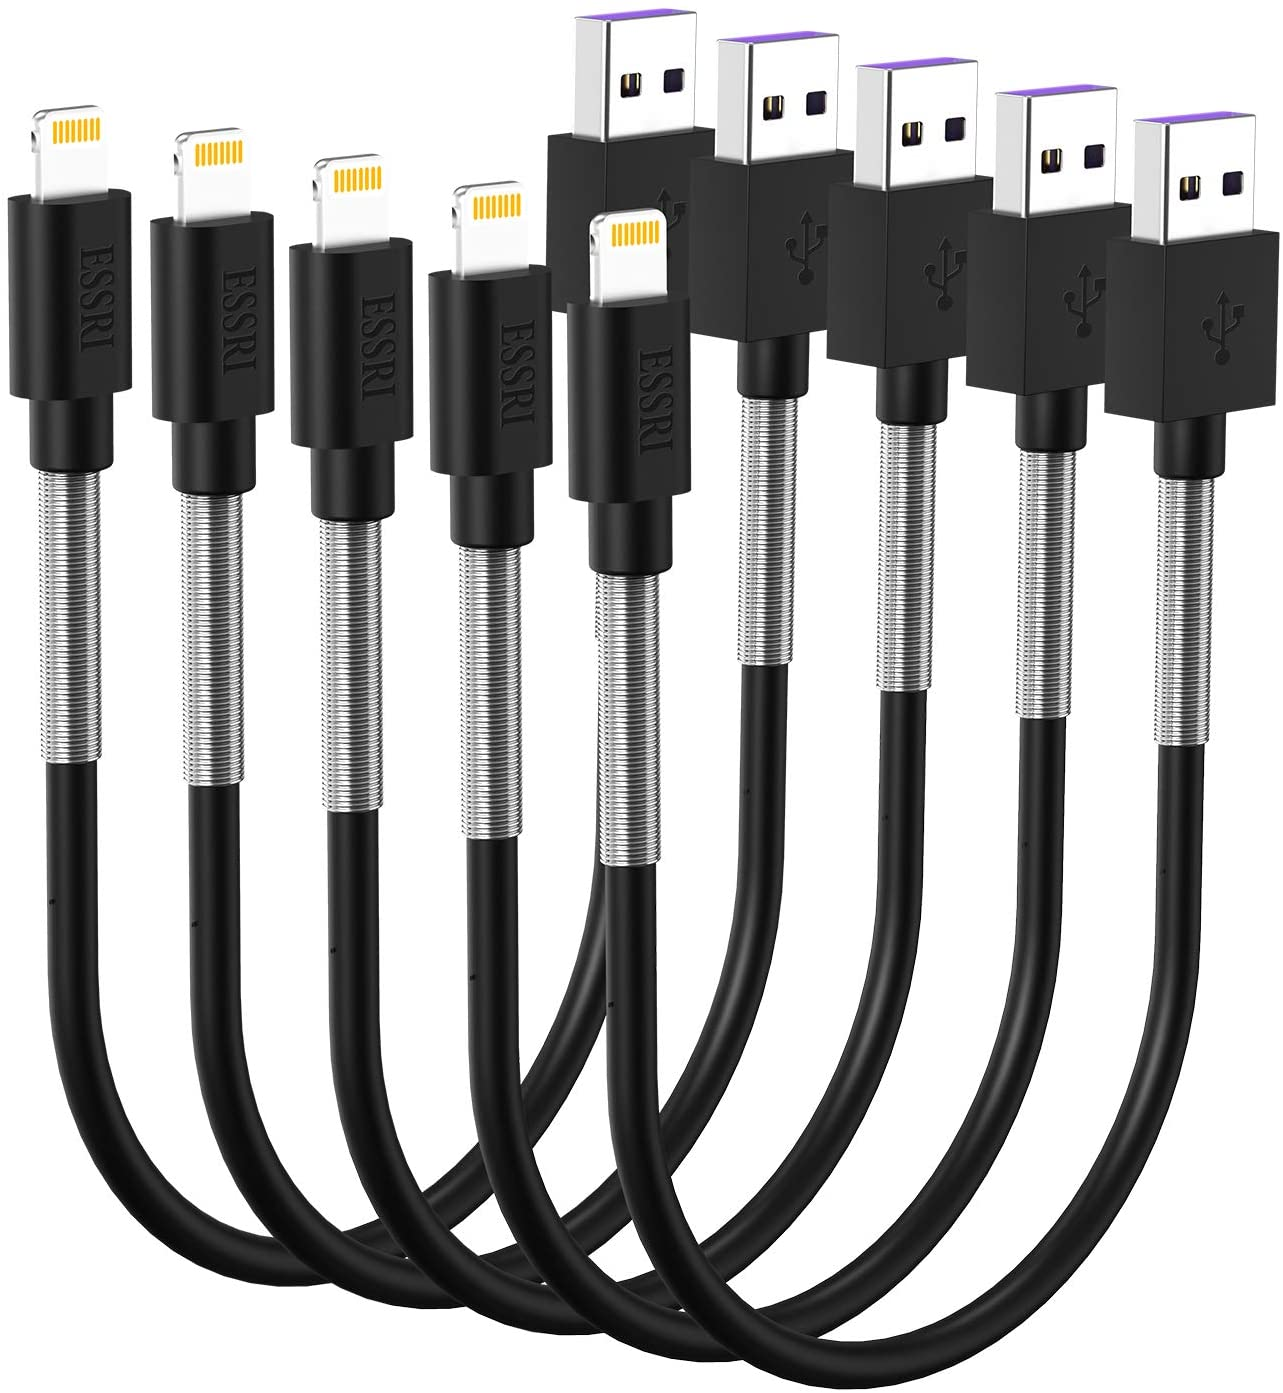 iPhone cables for each seat